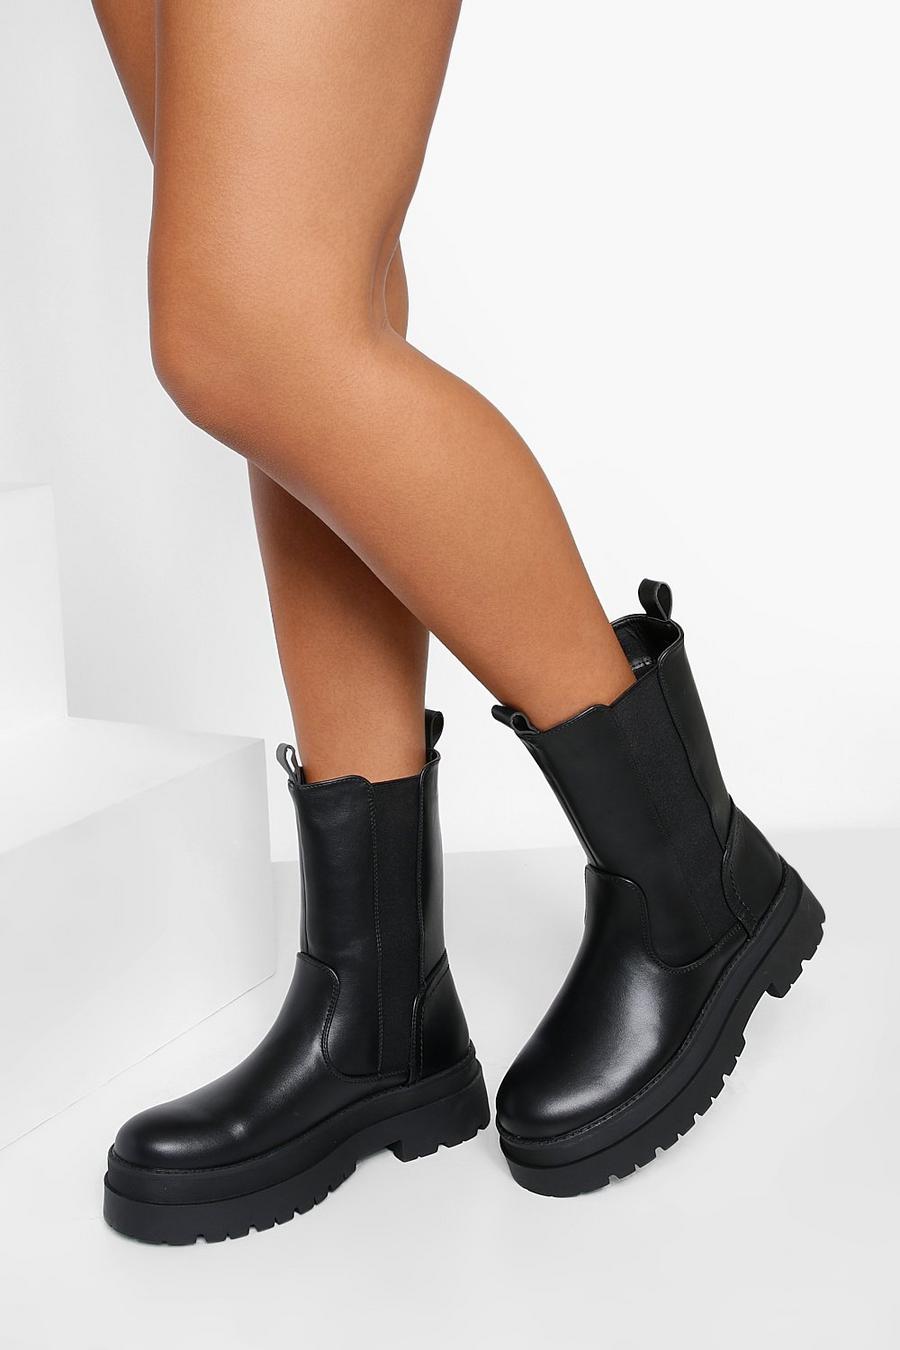 Black negro Chunky High Ankle Chelsea Boots